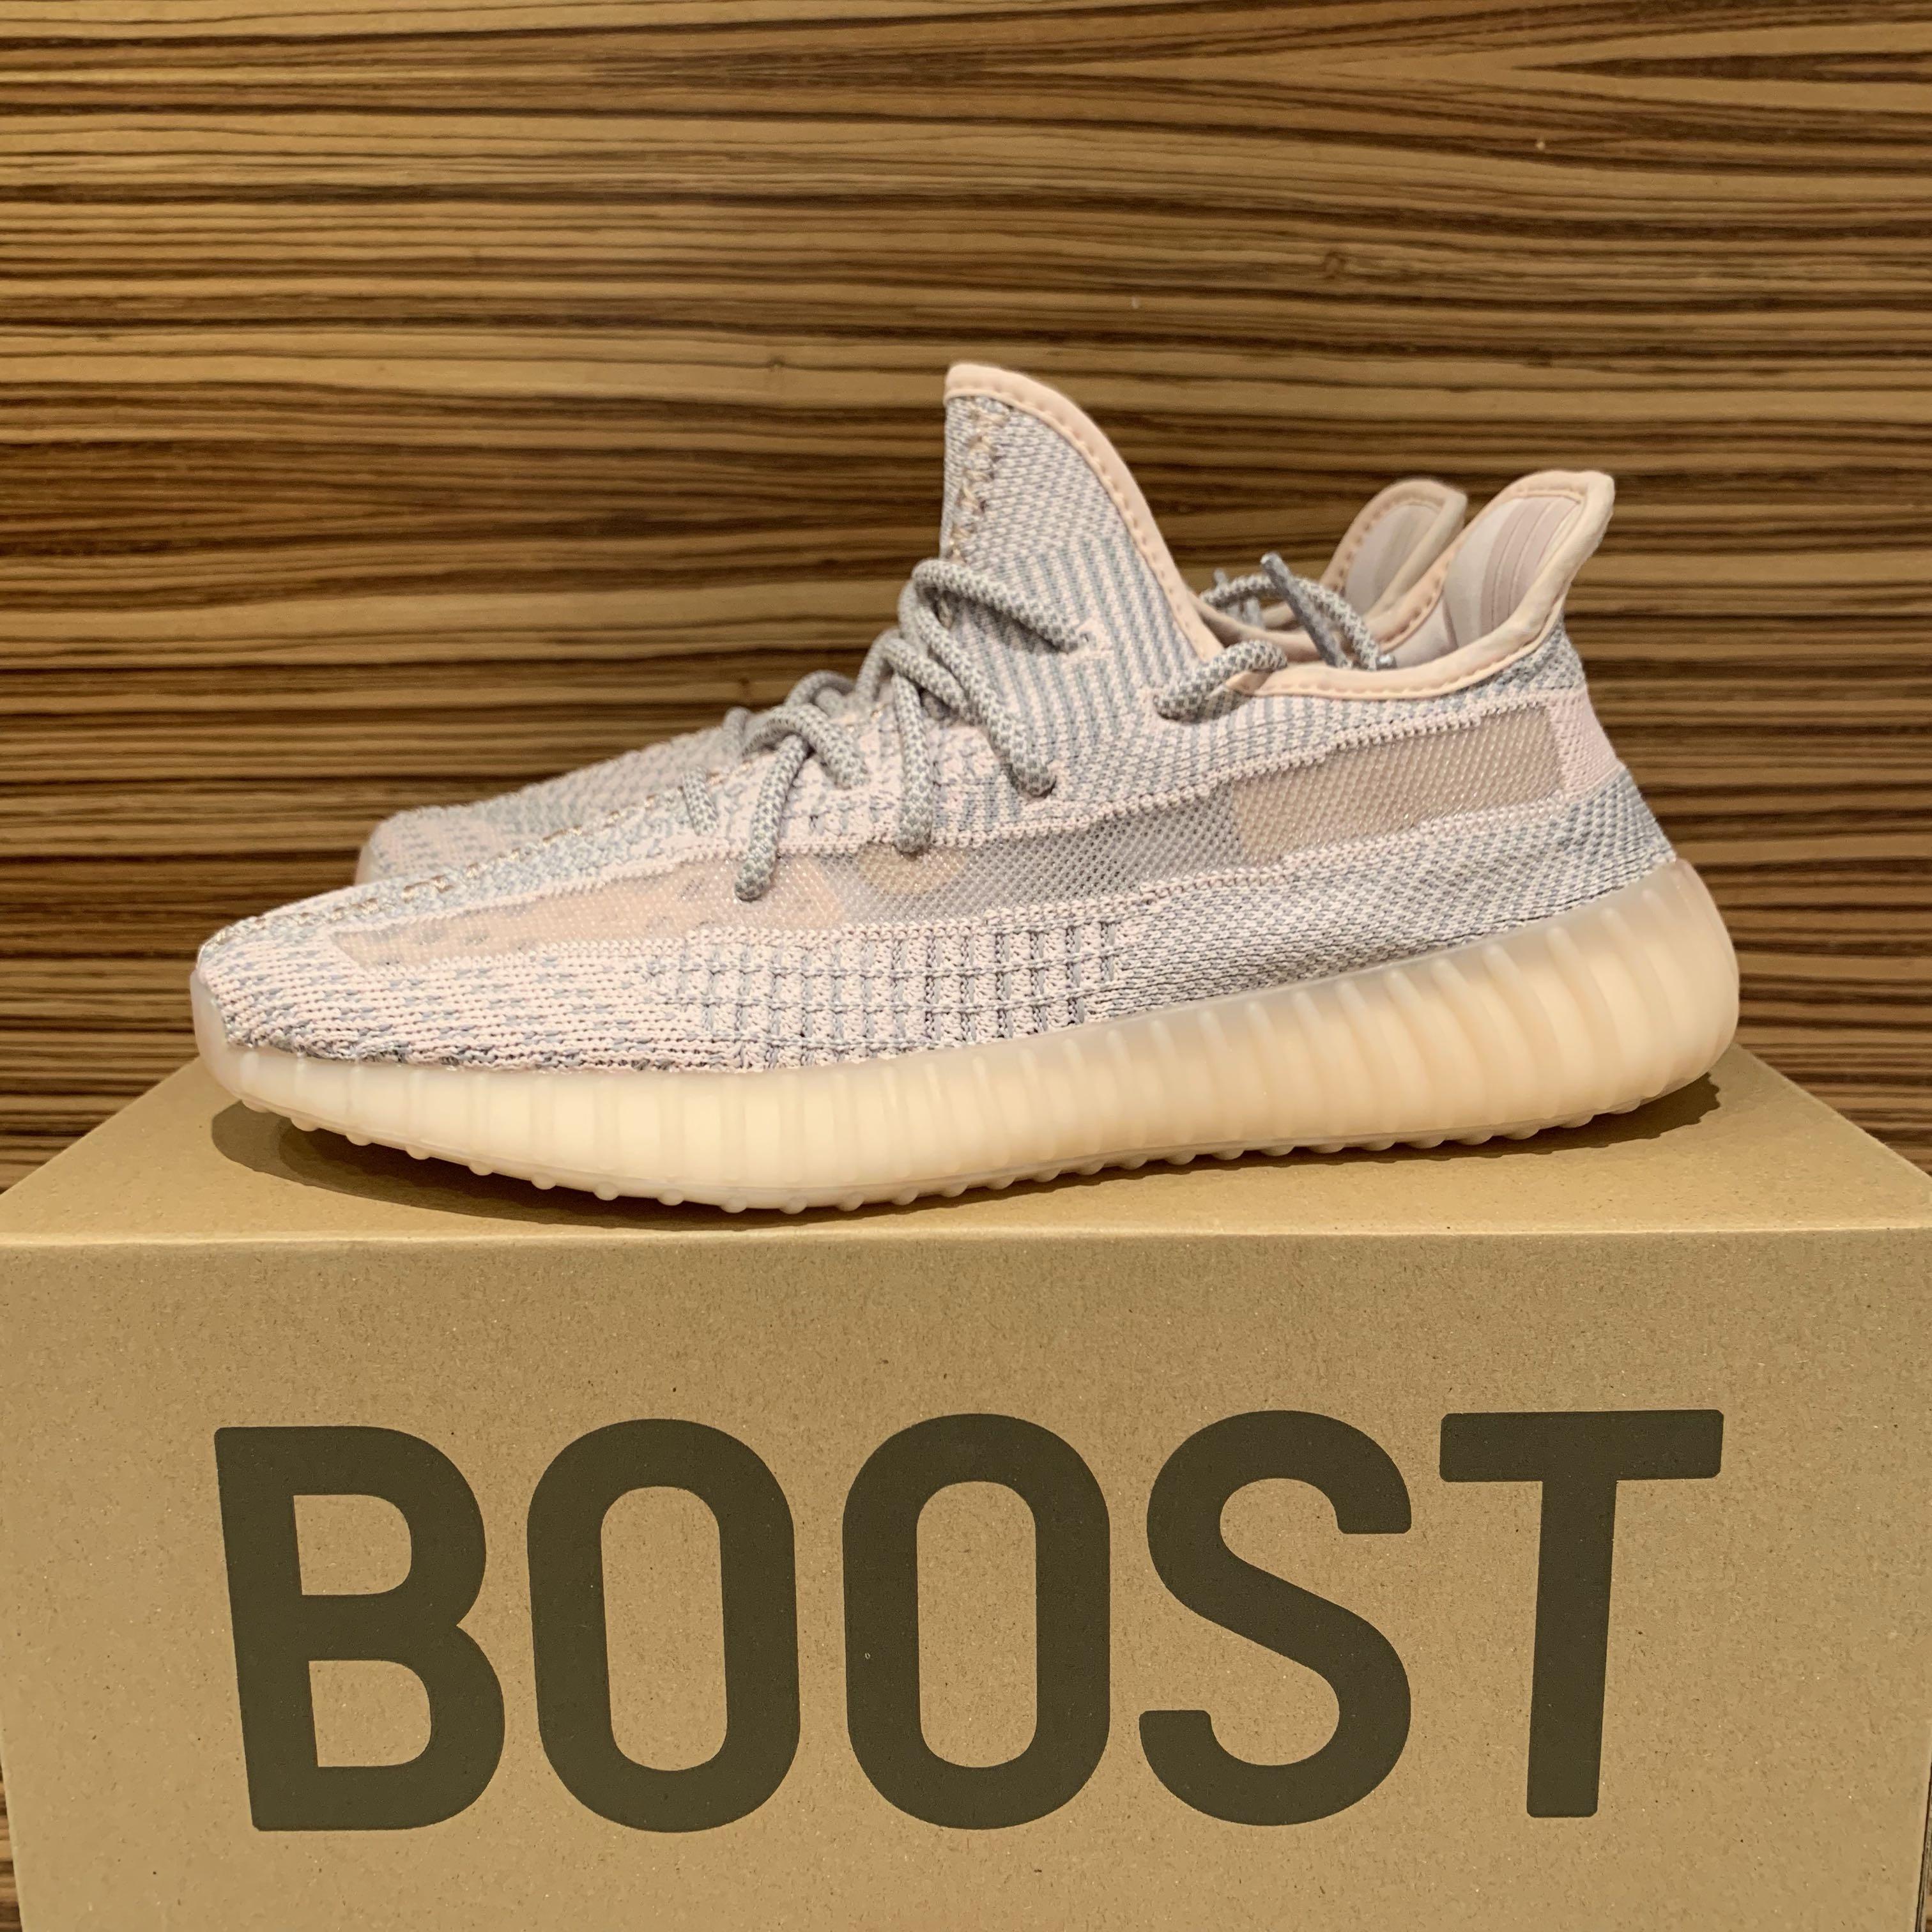 yeezy 35 synth non reflective